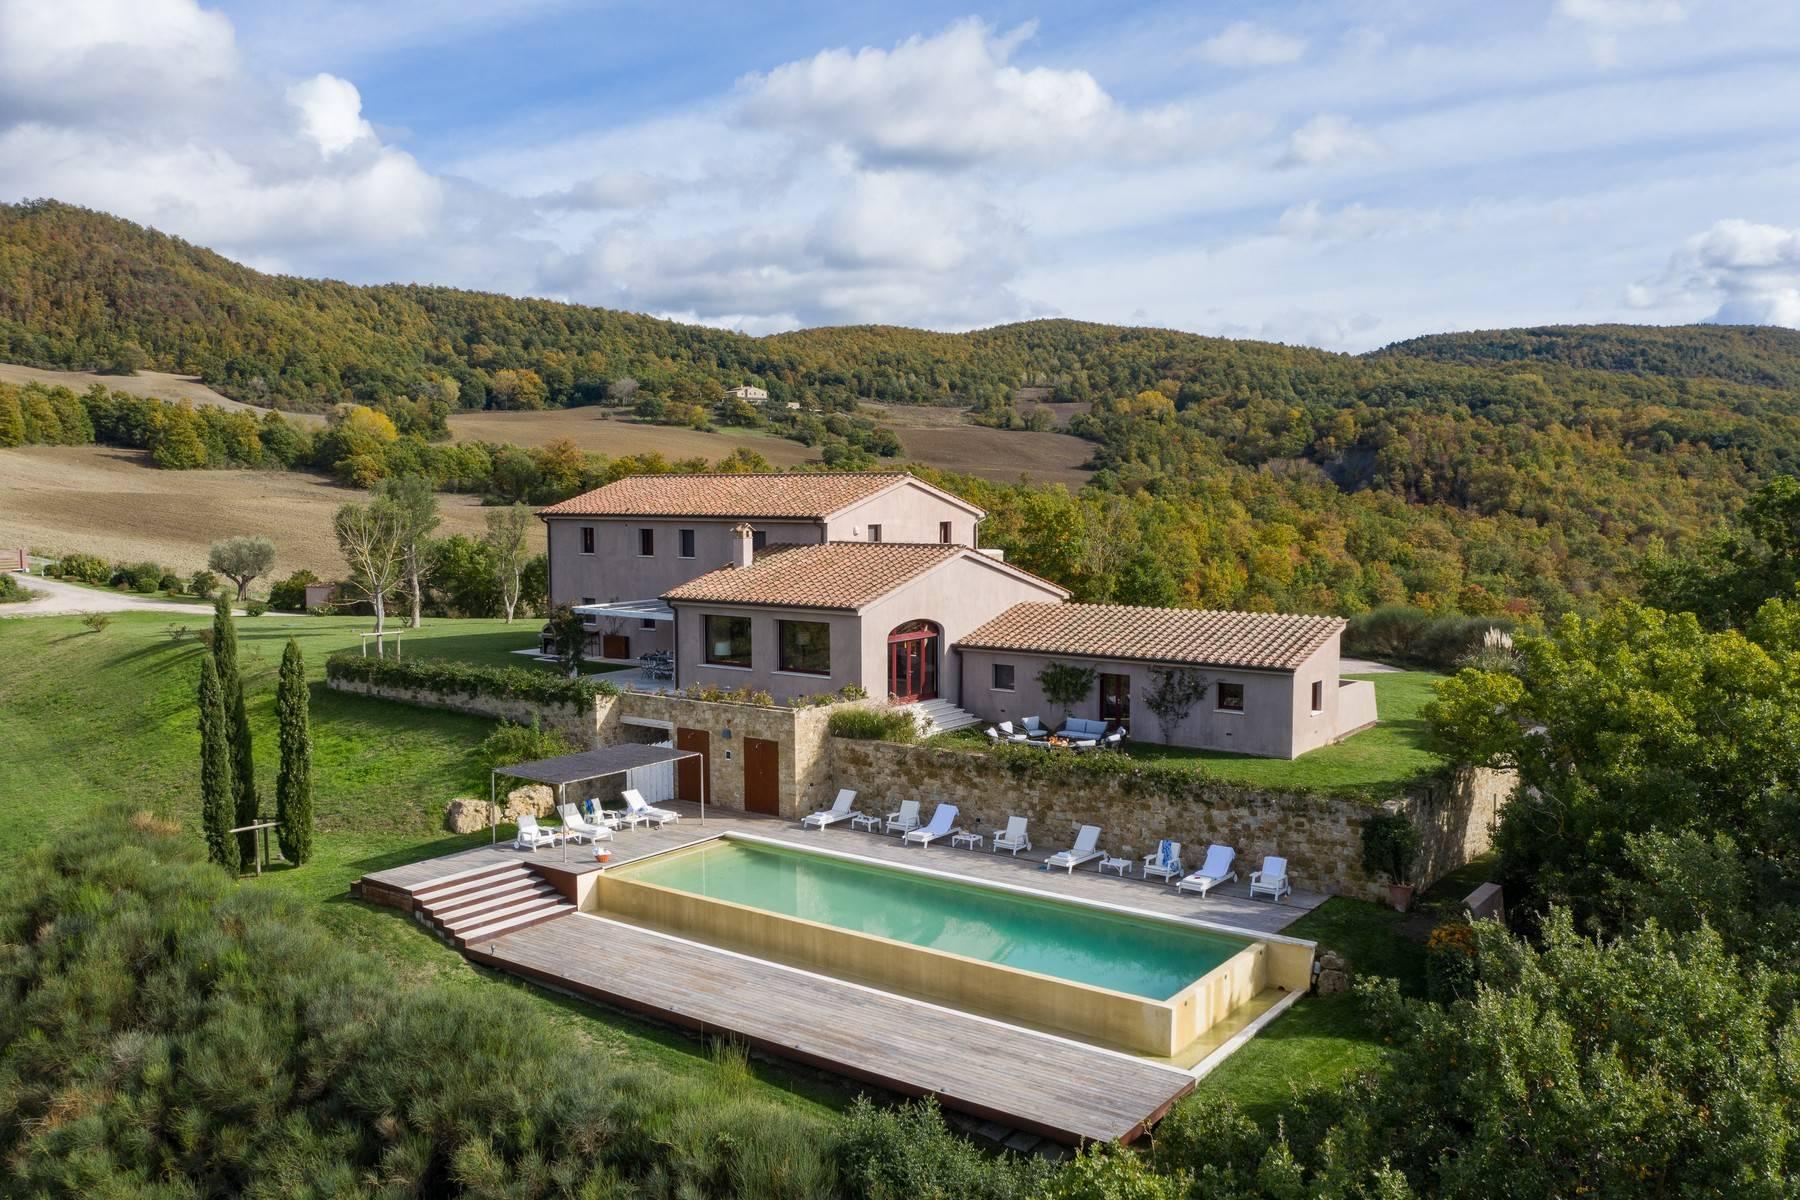 Luxury villa in the south of Tuscany - 1